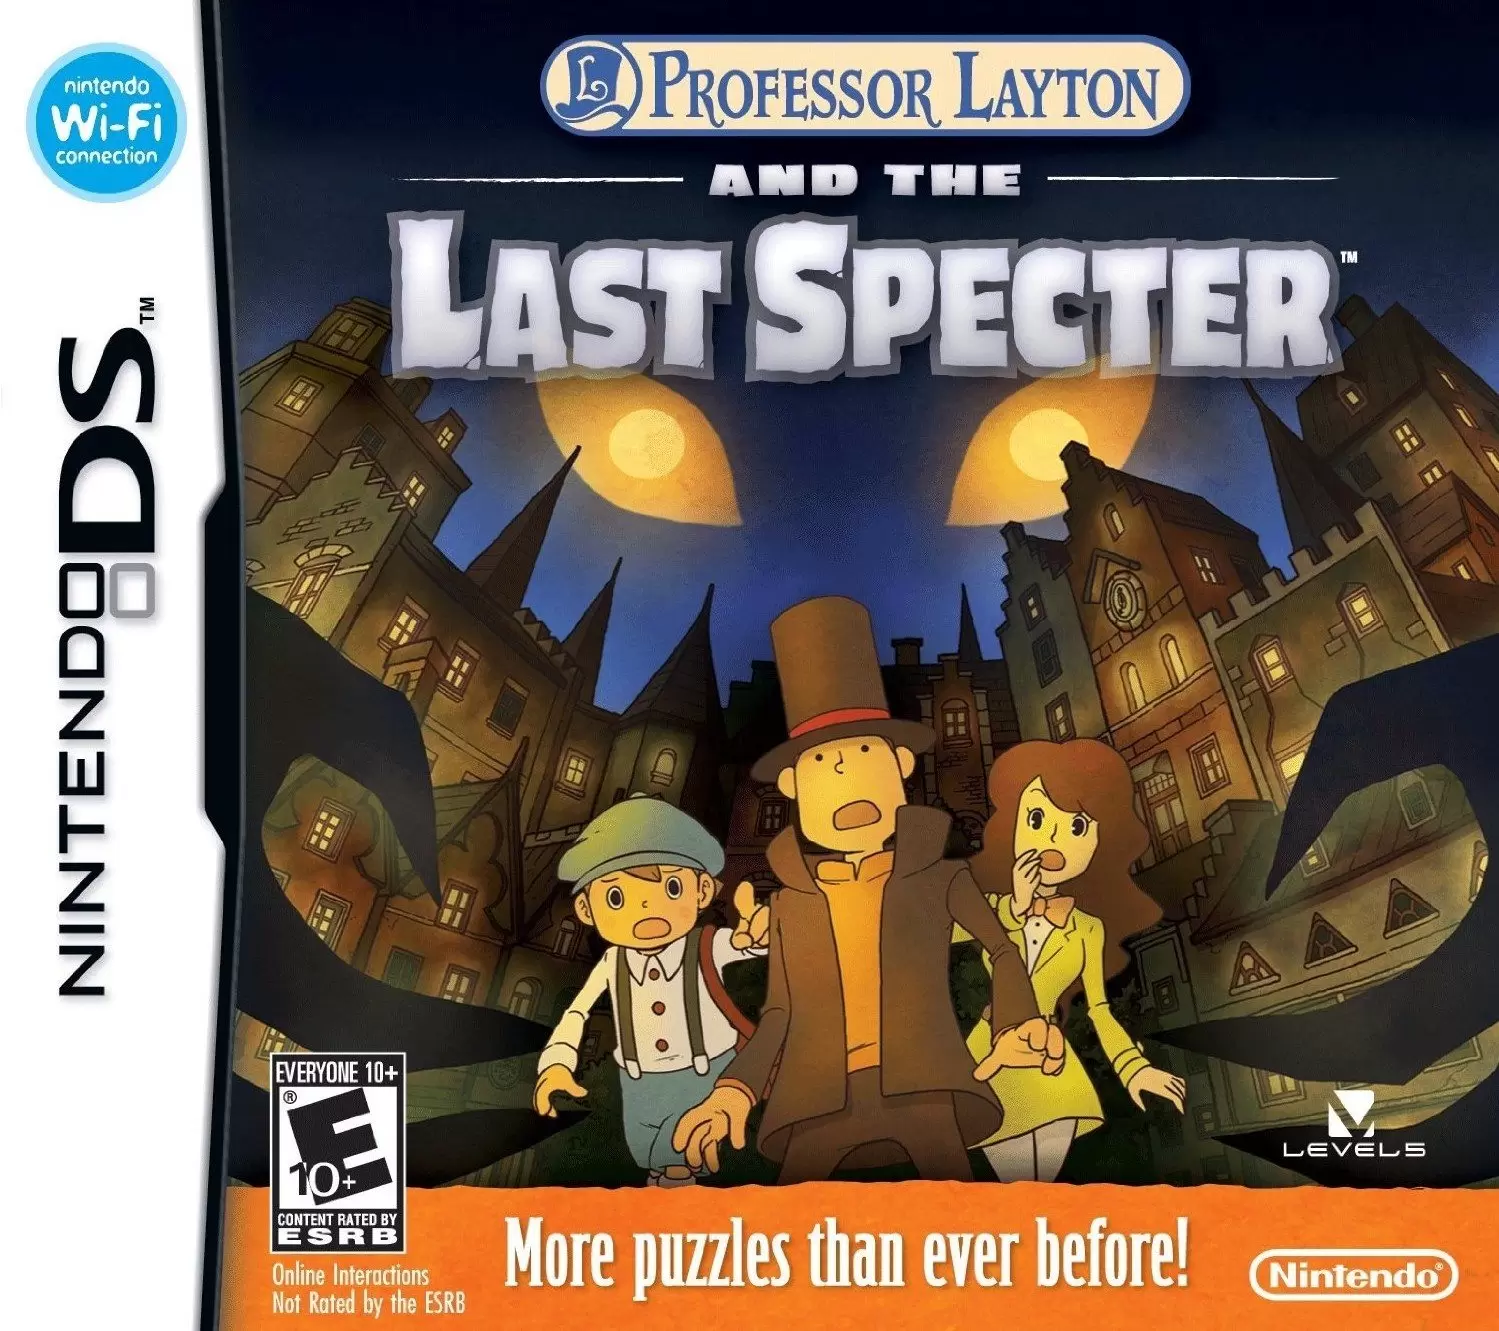 Nintendo DS Games - Professor Layton and the Last Specter